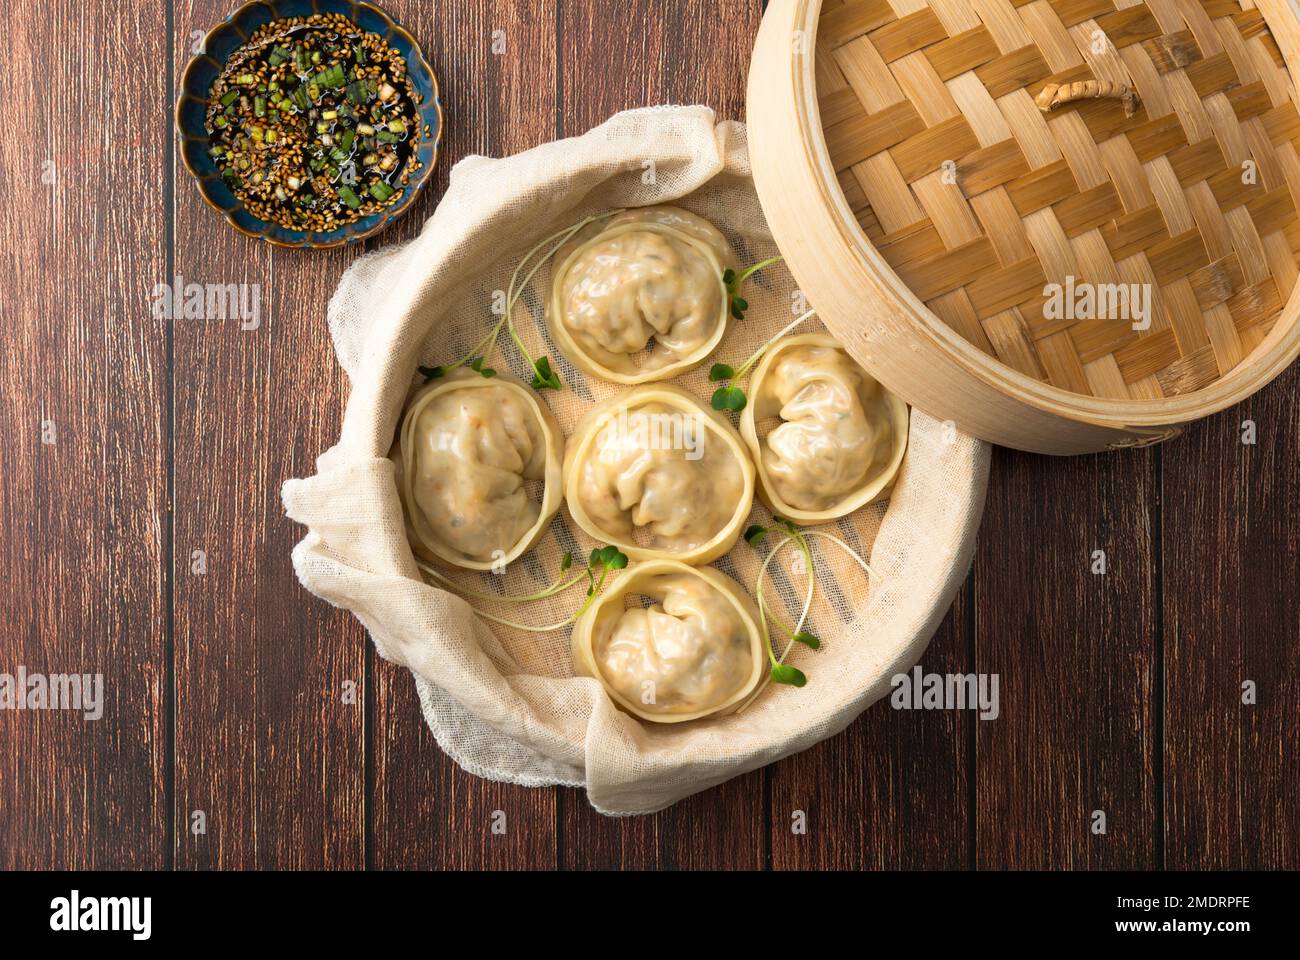 Delicious homemade Korean kimchi dumplings in a bamboo steamer viewed from above. Stock Photo